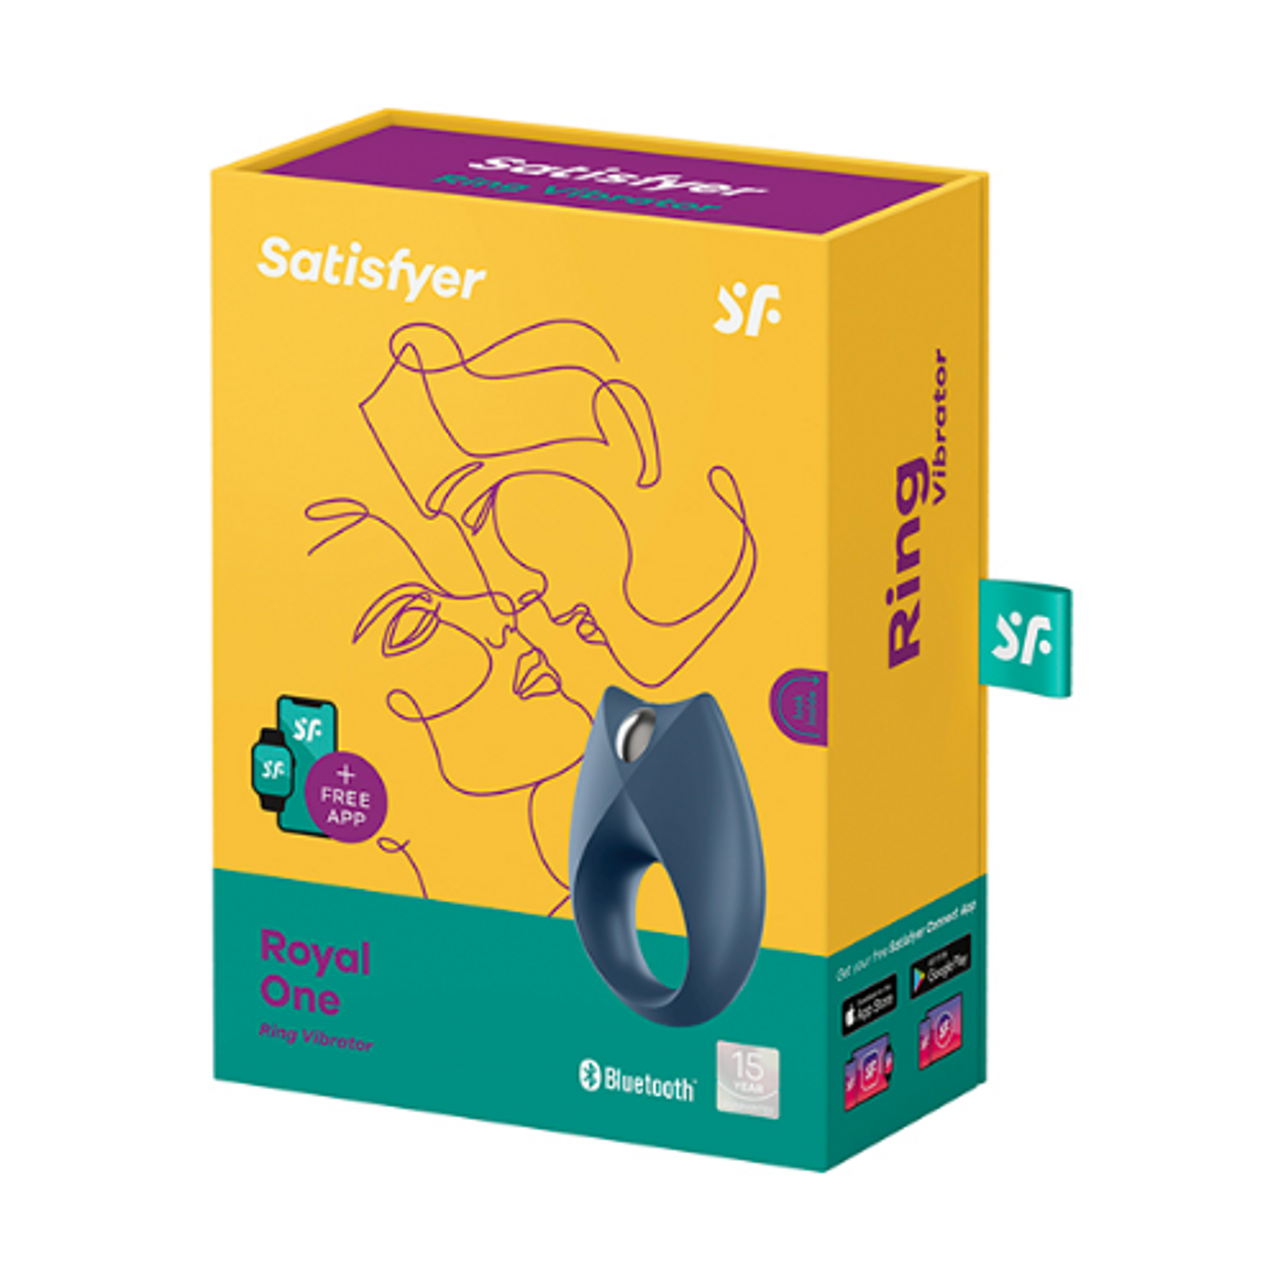 Satisfyer Royal One Vibrating Ring for Couples with App from Condom Depot